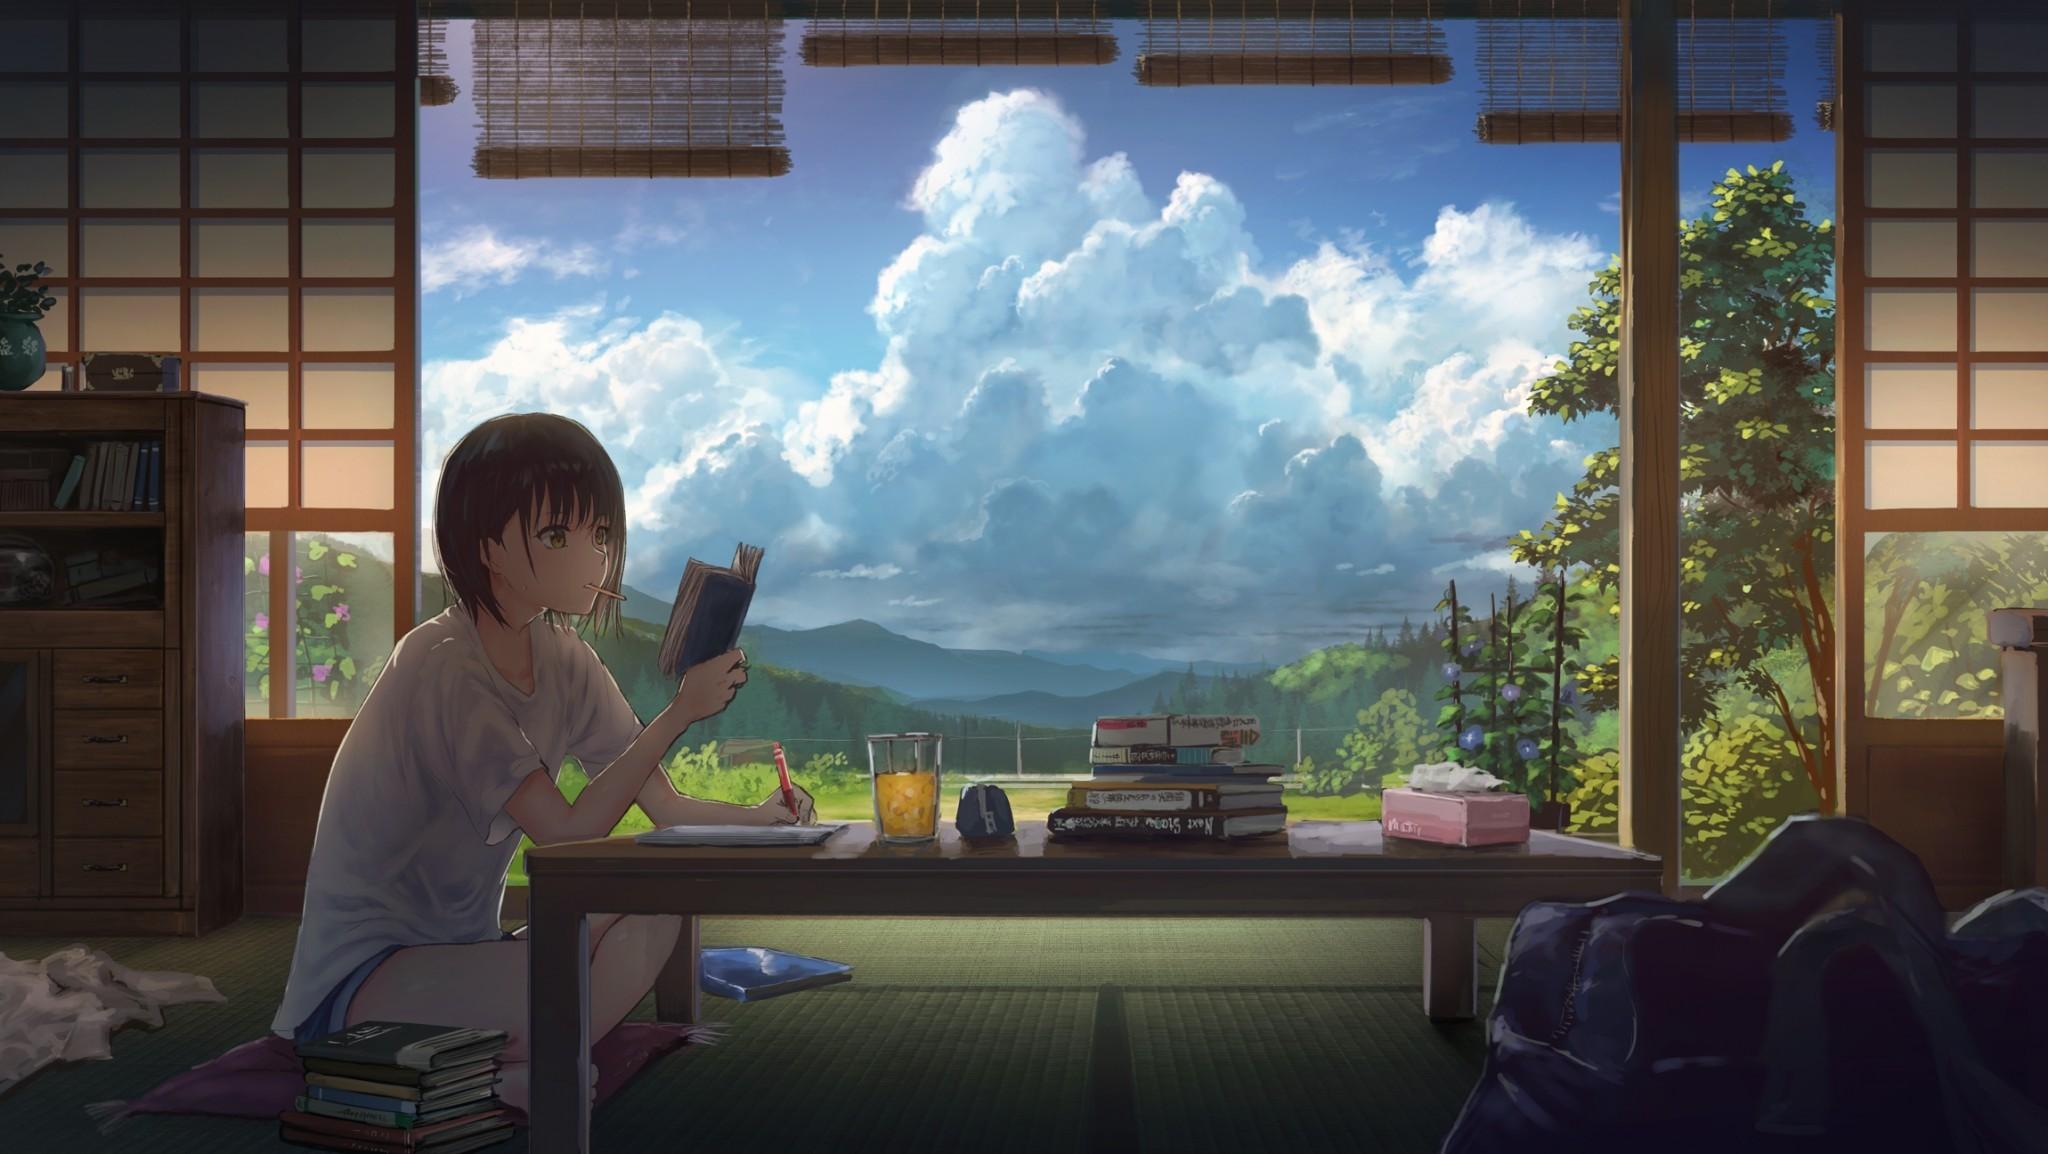 Download 2048x1154 Anime Girl, Reading, Summer, Clouds, Scenic